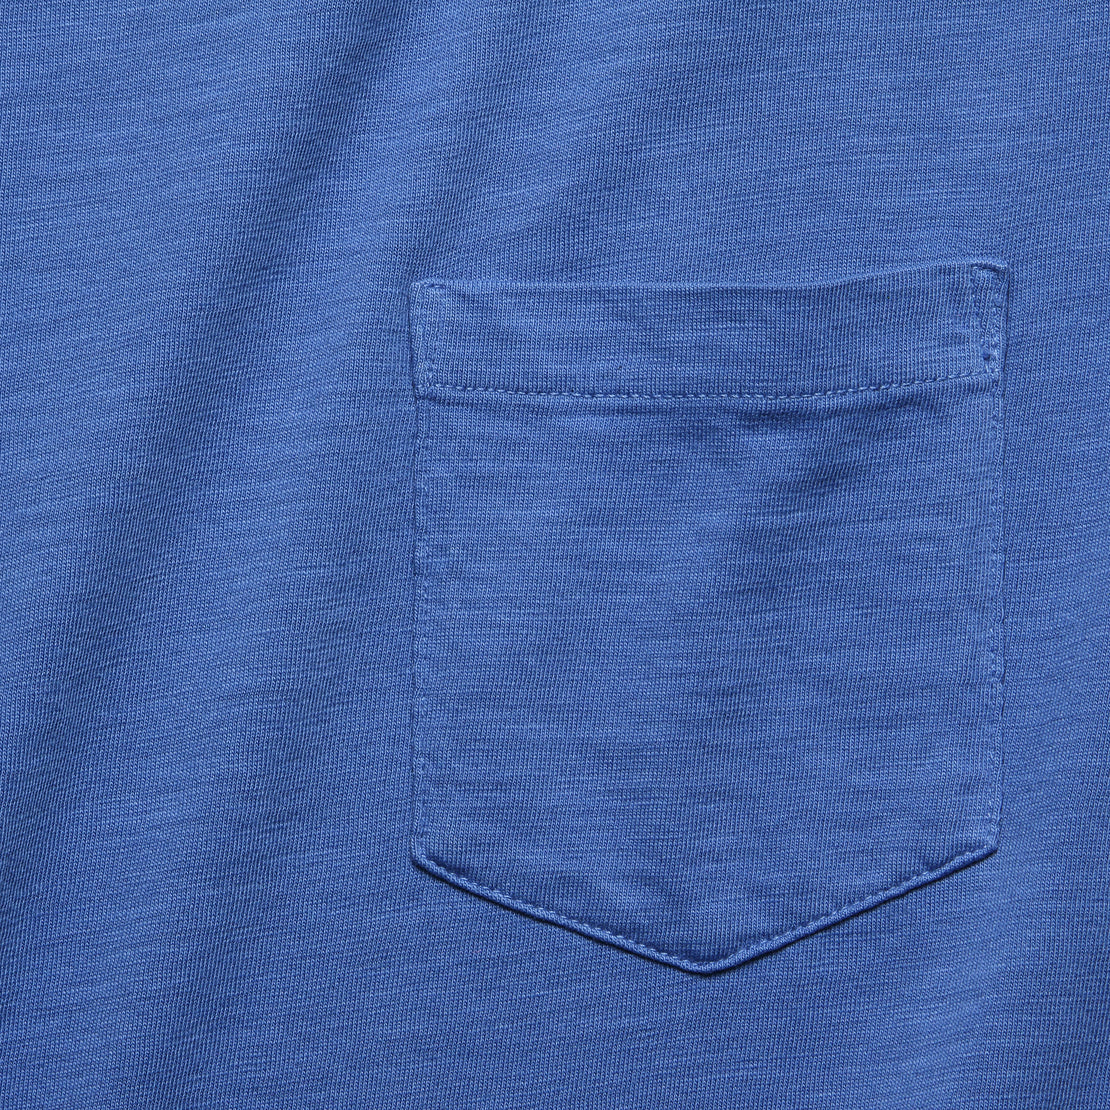 Garment Dyed Pocket Tee - Cobalt - Faherty - STAG Provisions - Tops - S/S Tee